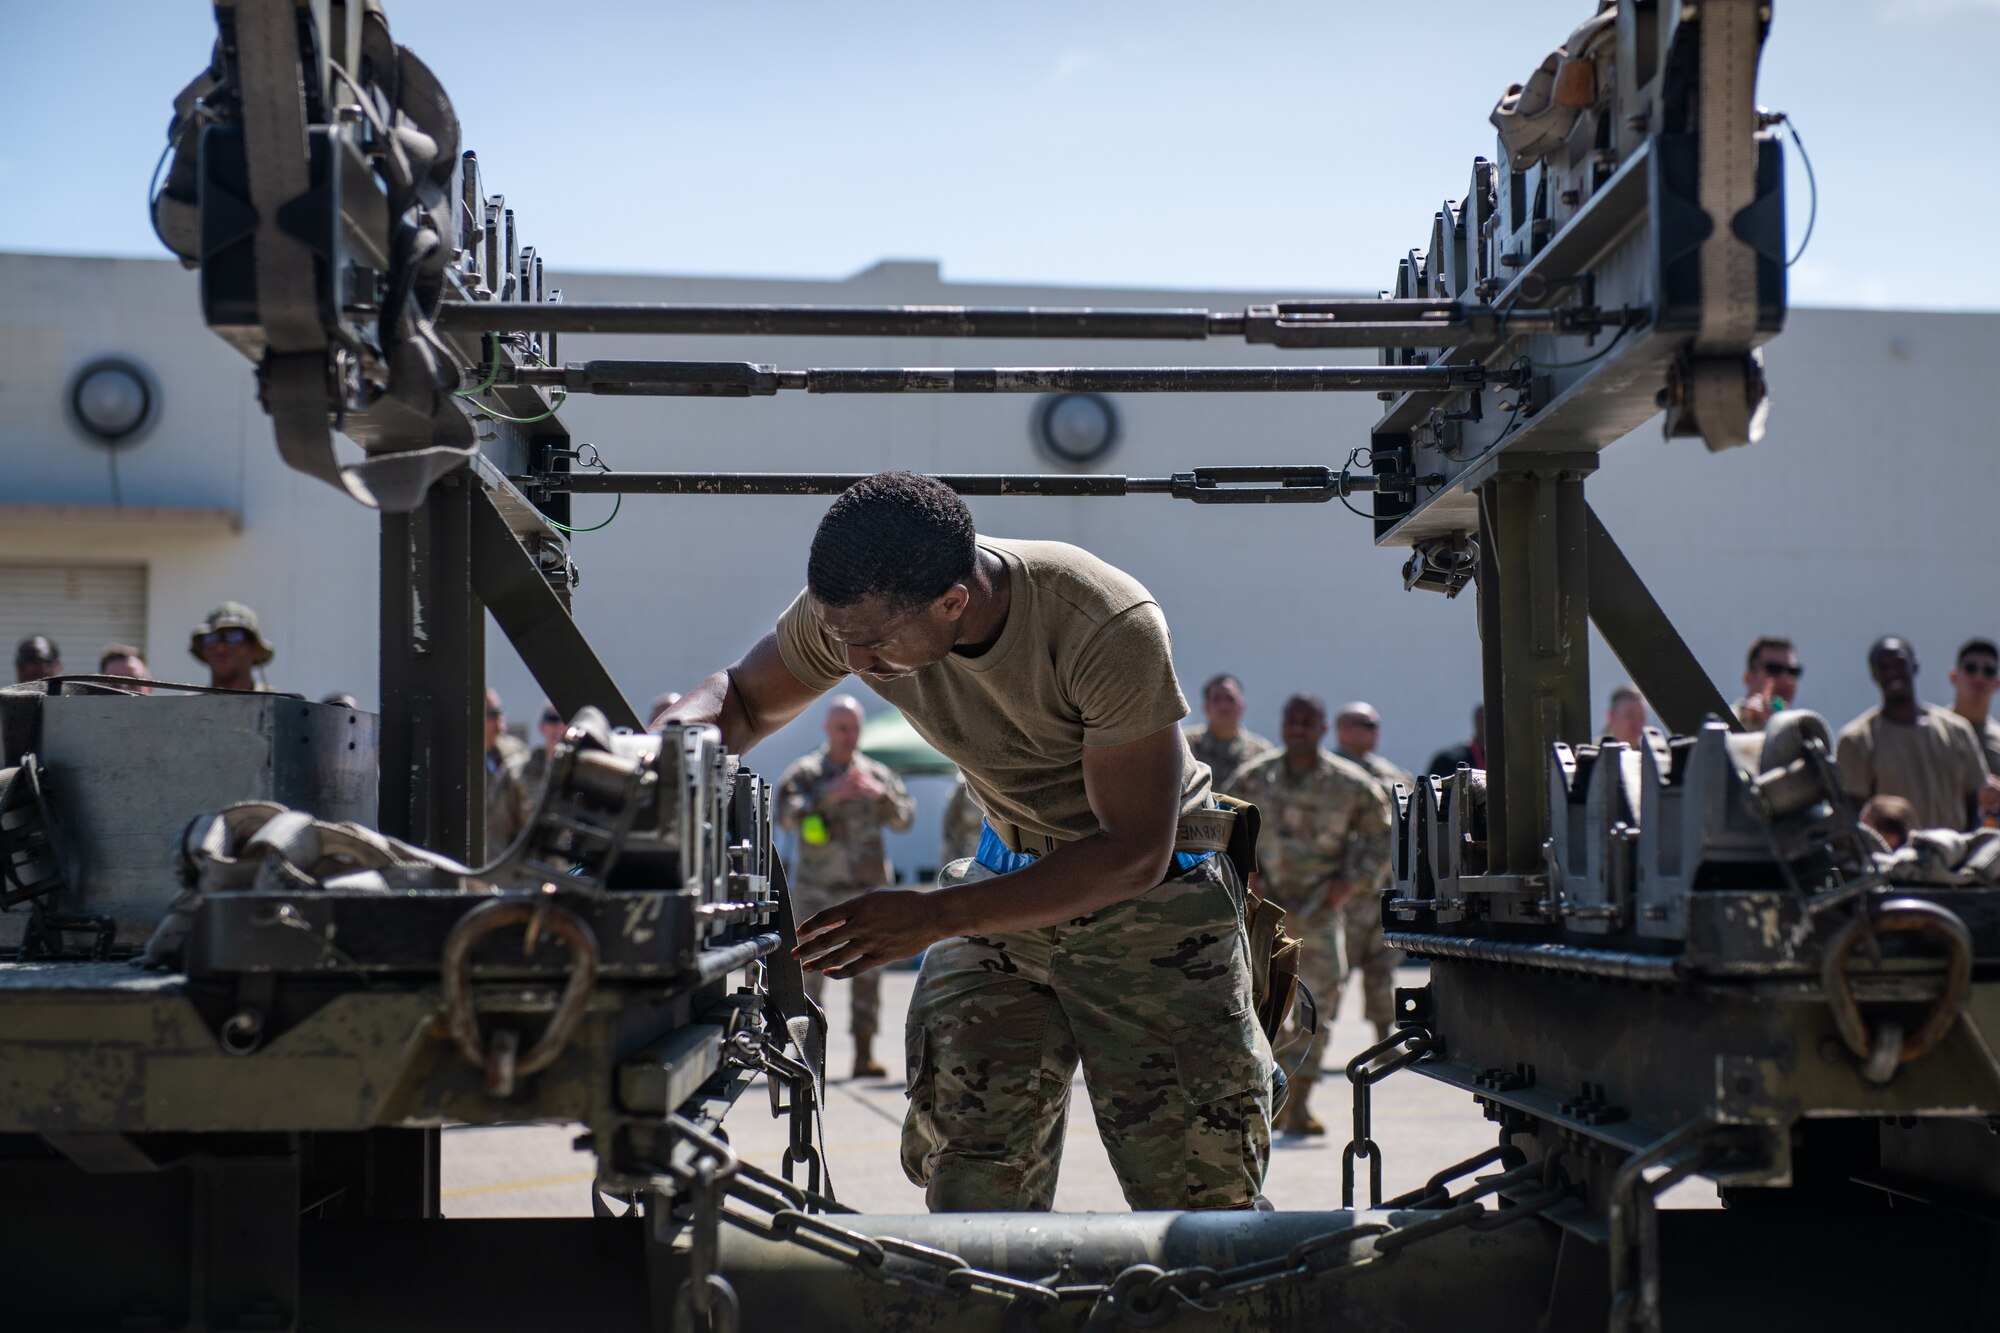 An airman stands framed by a munitions cart, securing straps on the cart